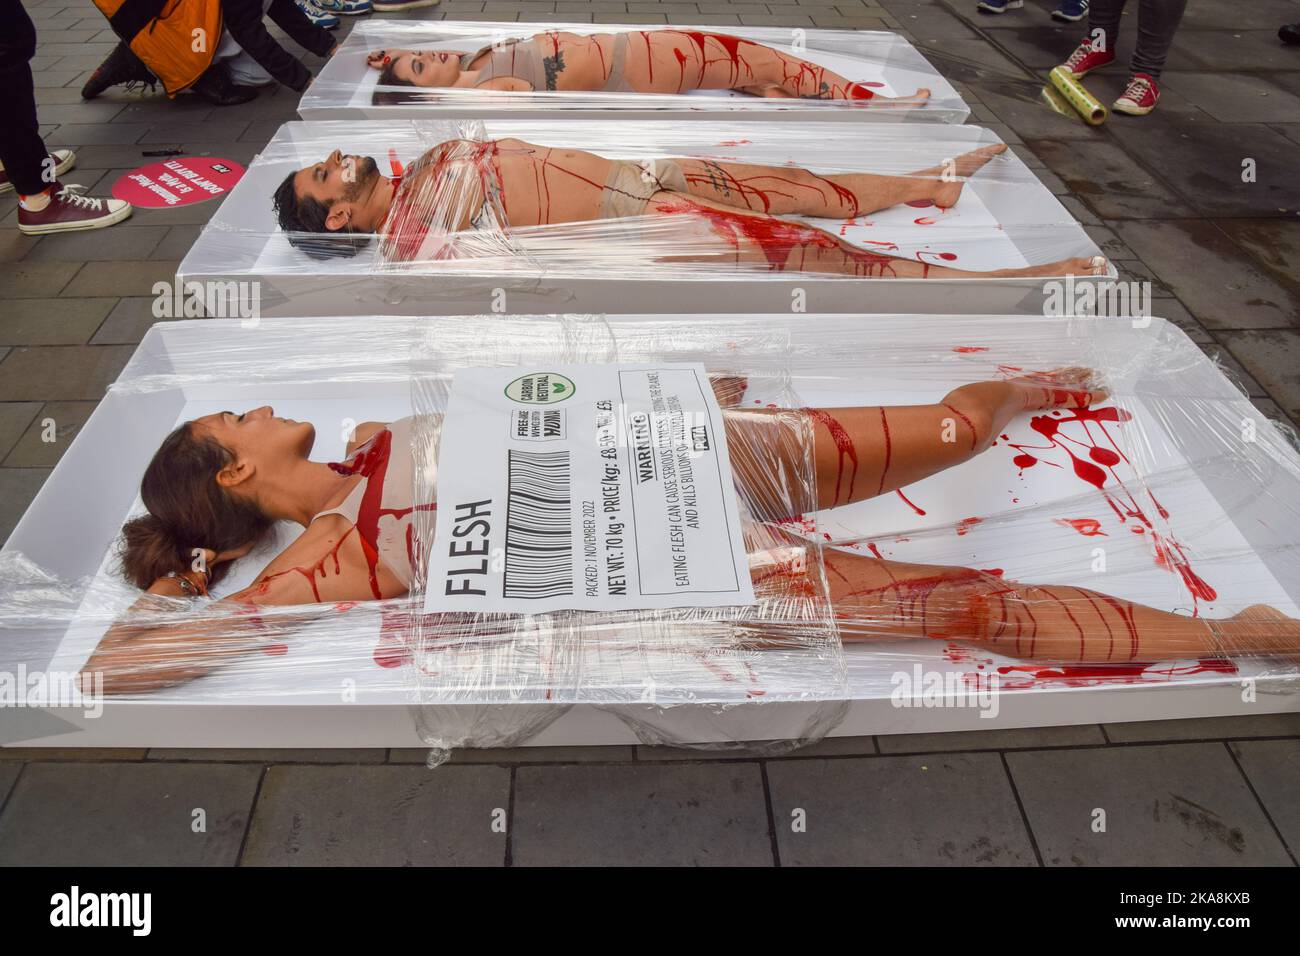 London, England, UK. 1st Nov, 2022. PETA activists packaged as 'Free-range human meat'' staged an action outside Whole Foods store next to Piccadilly Circus on World Vegan Day to highlight the fact that ''humane'' labels on meat are meaningless, to remind people of the horrors of the meat industry, and to promote veganism. (Credit Image: © Vuk Valcic/ZUMA Press Wire) Stock Photo